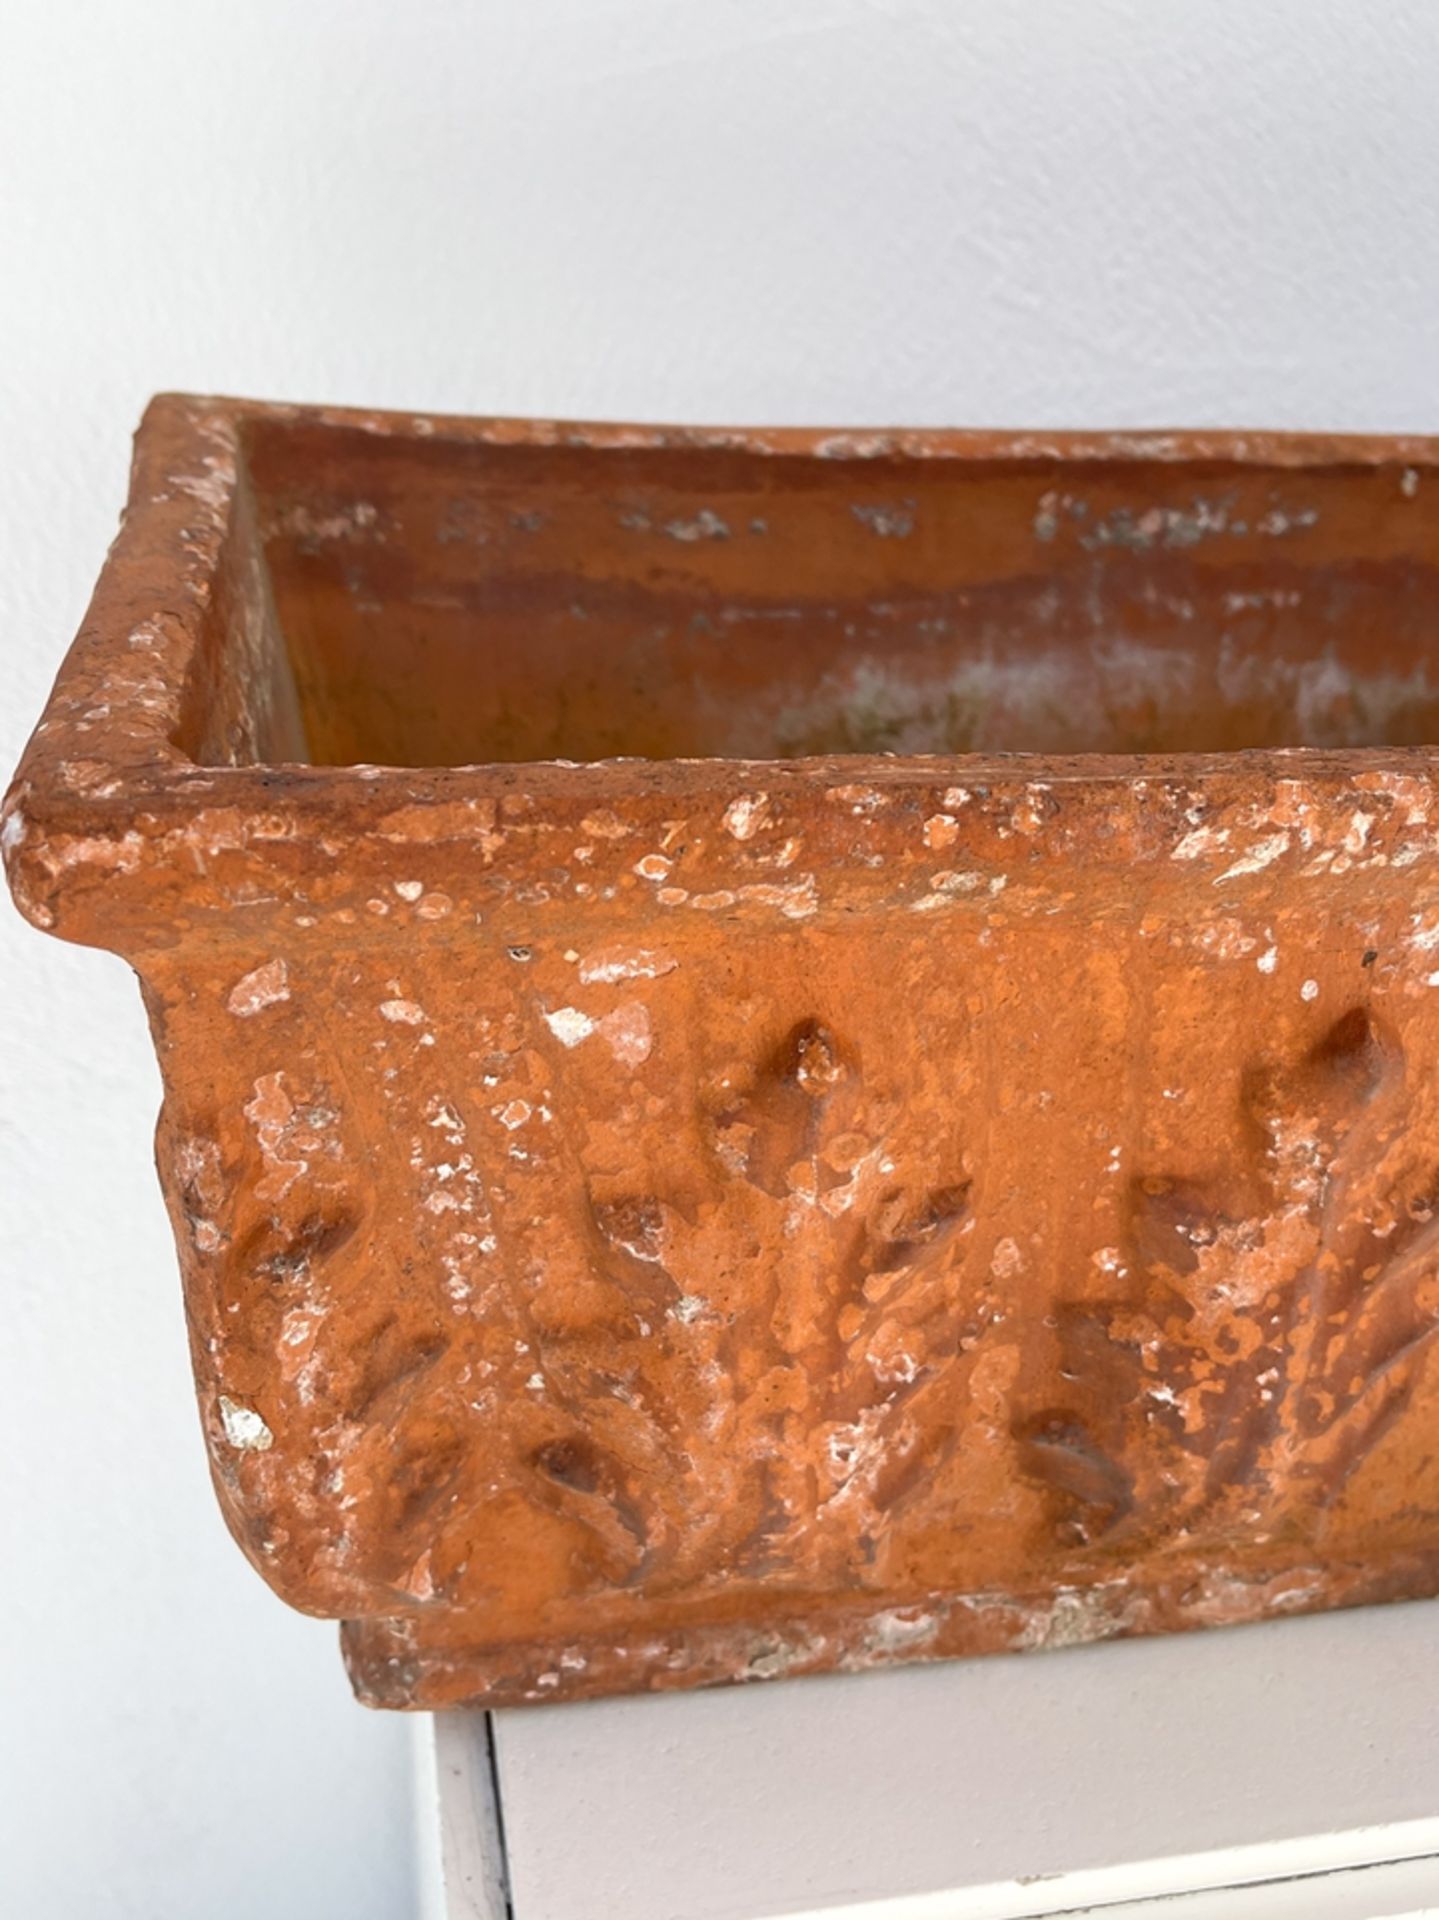 Terracotta Pflanztrog/Schale - Image 3 of 5